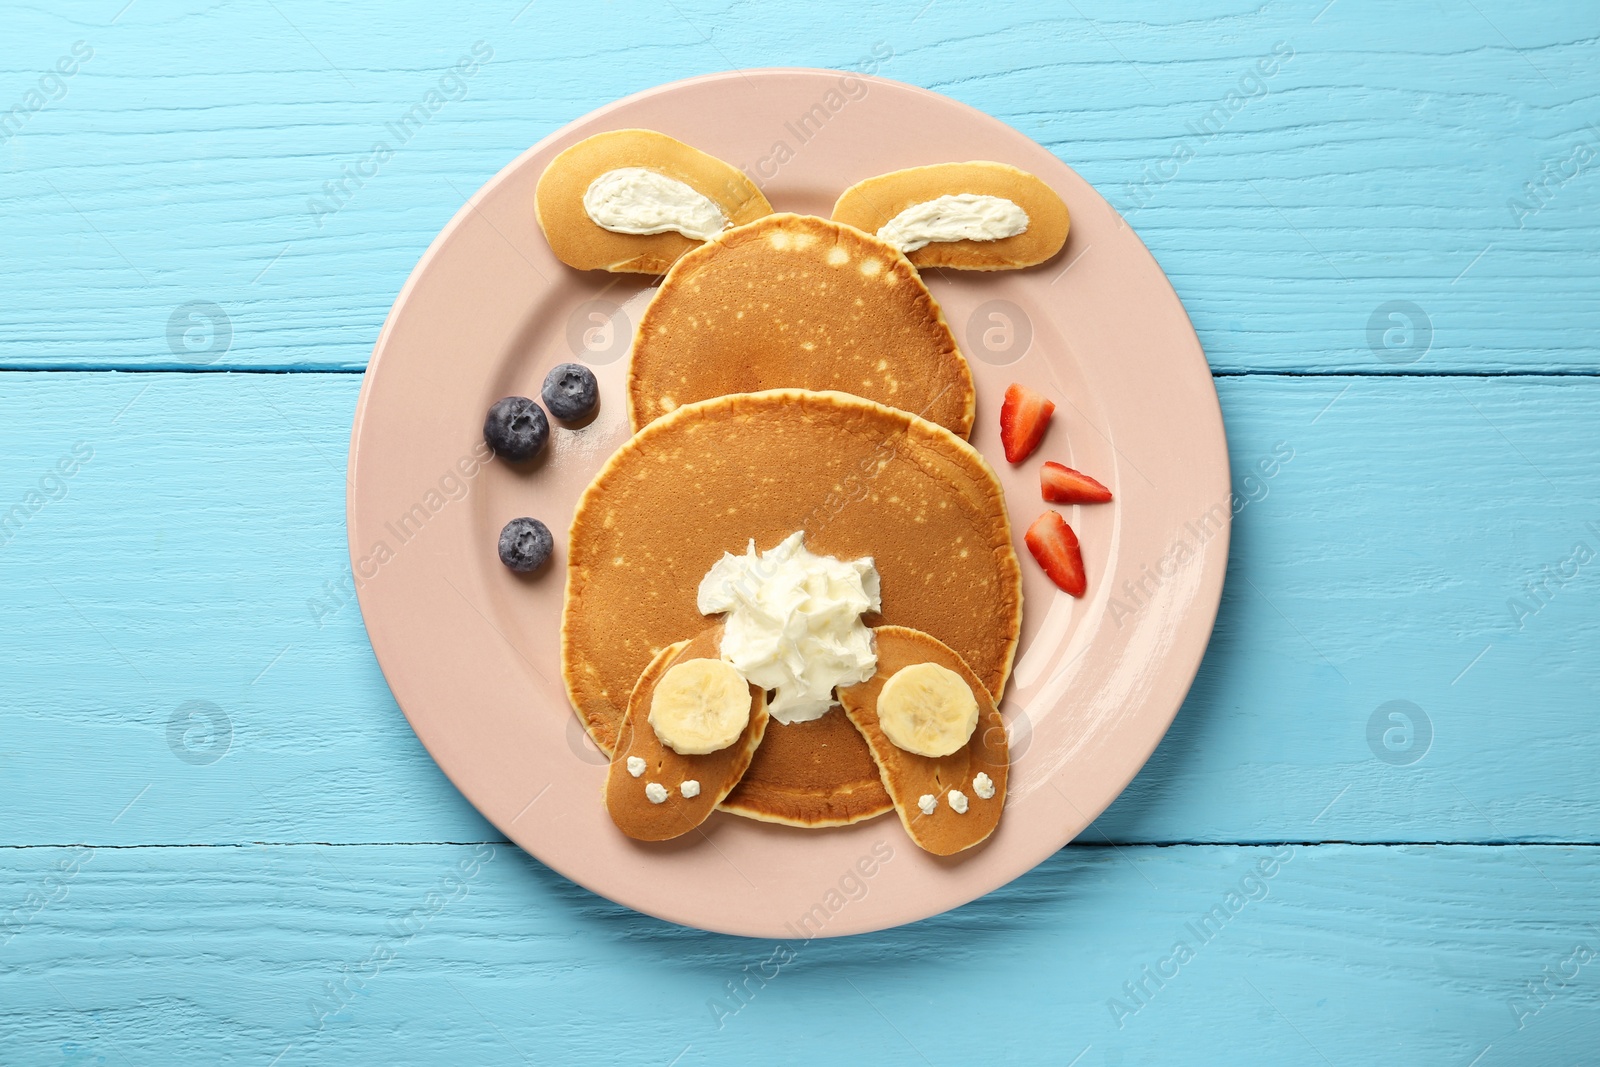 Photo of Creative serving for kids. Plate with cute bunny made of pancakes, berries, cream and banana on light blue wooden table, top view